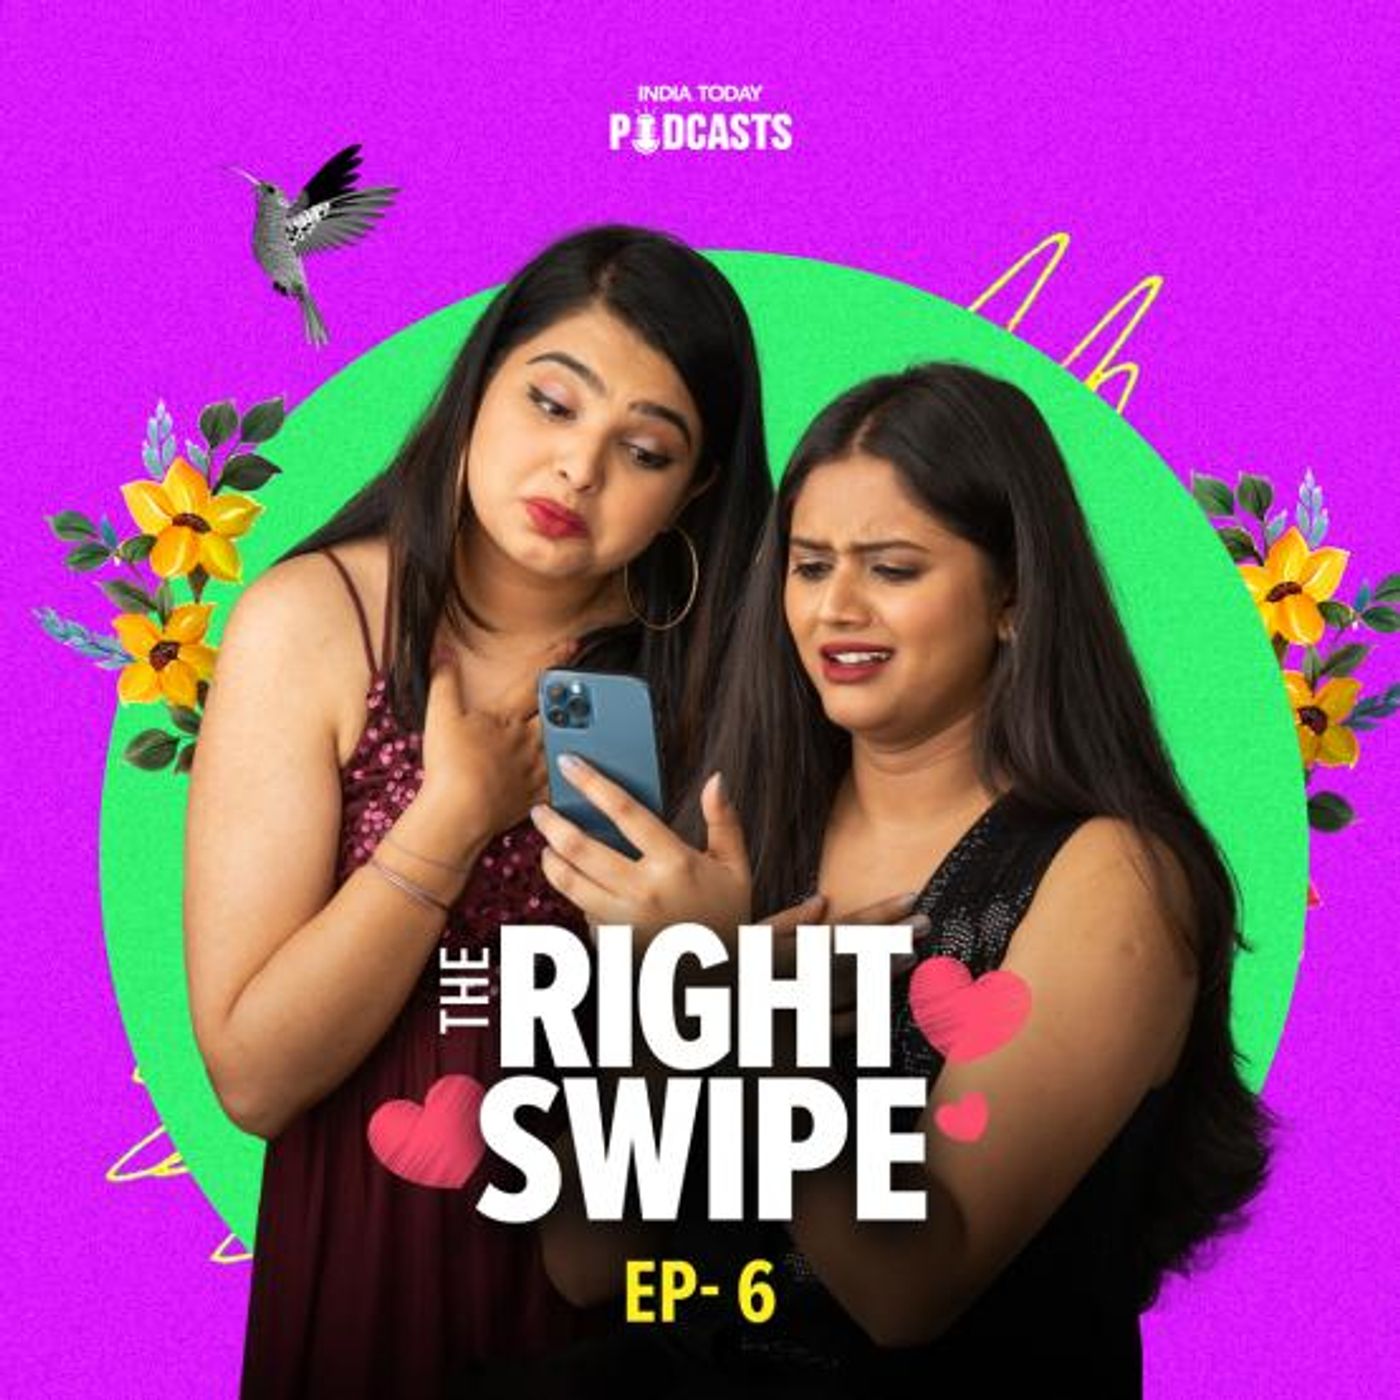 How to Scandalise A Straight Guy 101 |The Right Swipe Ep 06